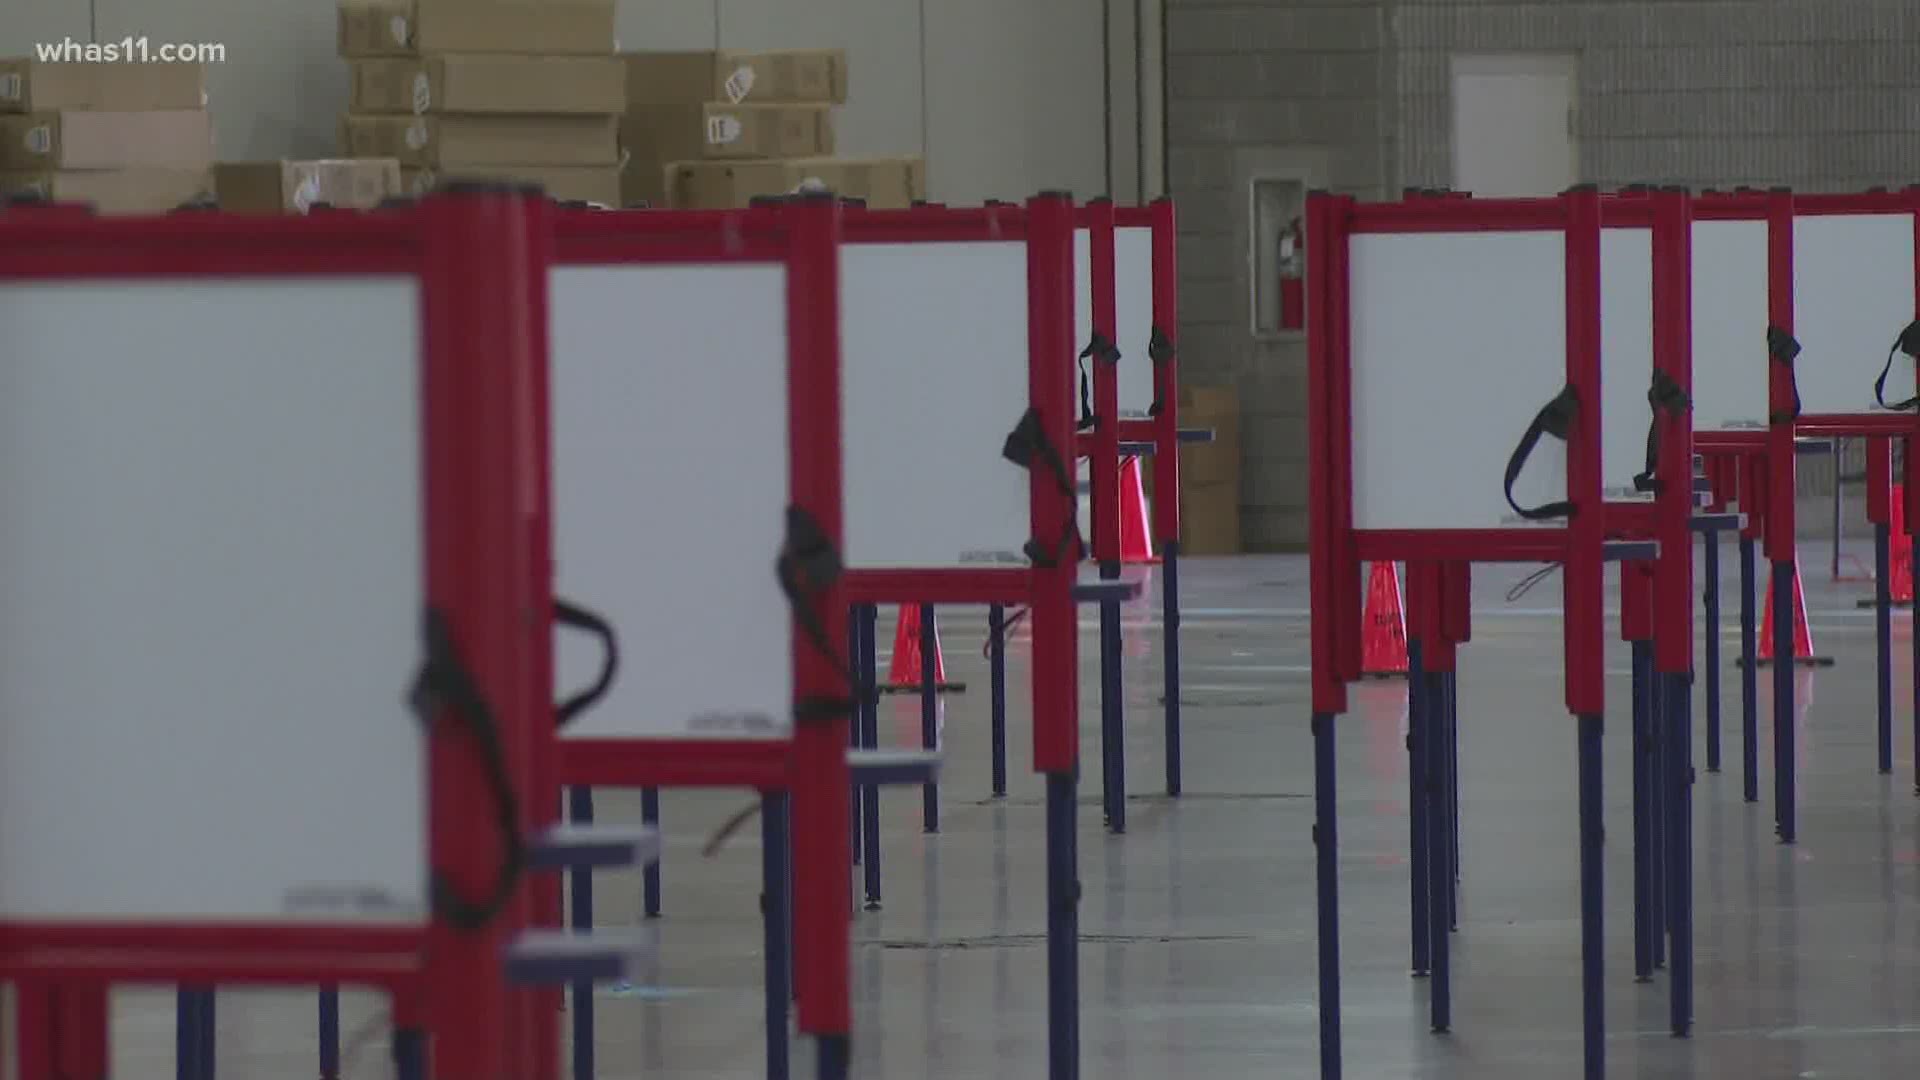 Early, in-person voting is already underway this week with nearly 3,000 voters already casting their ballots.